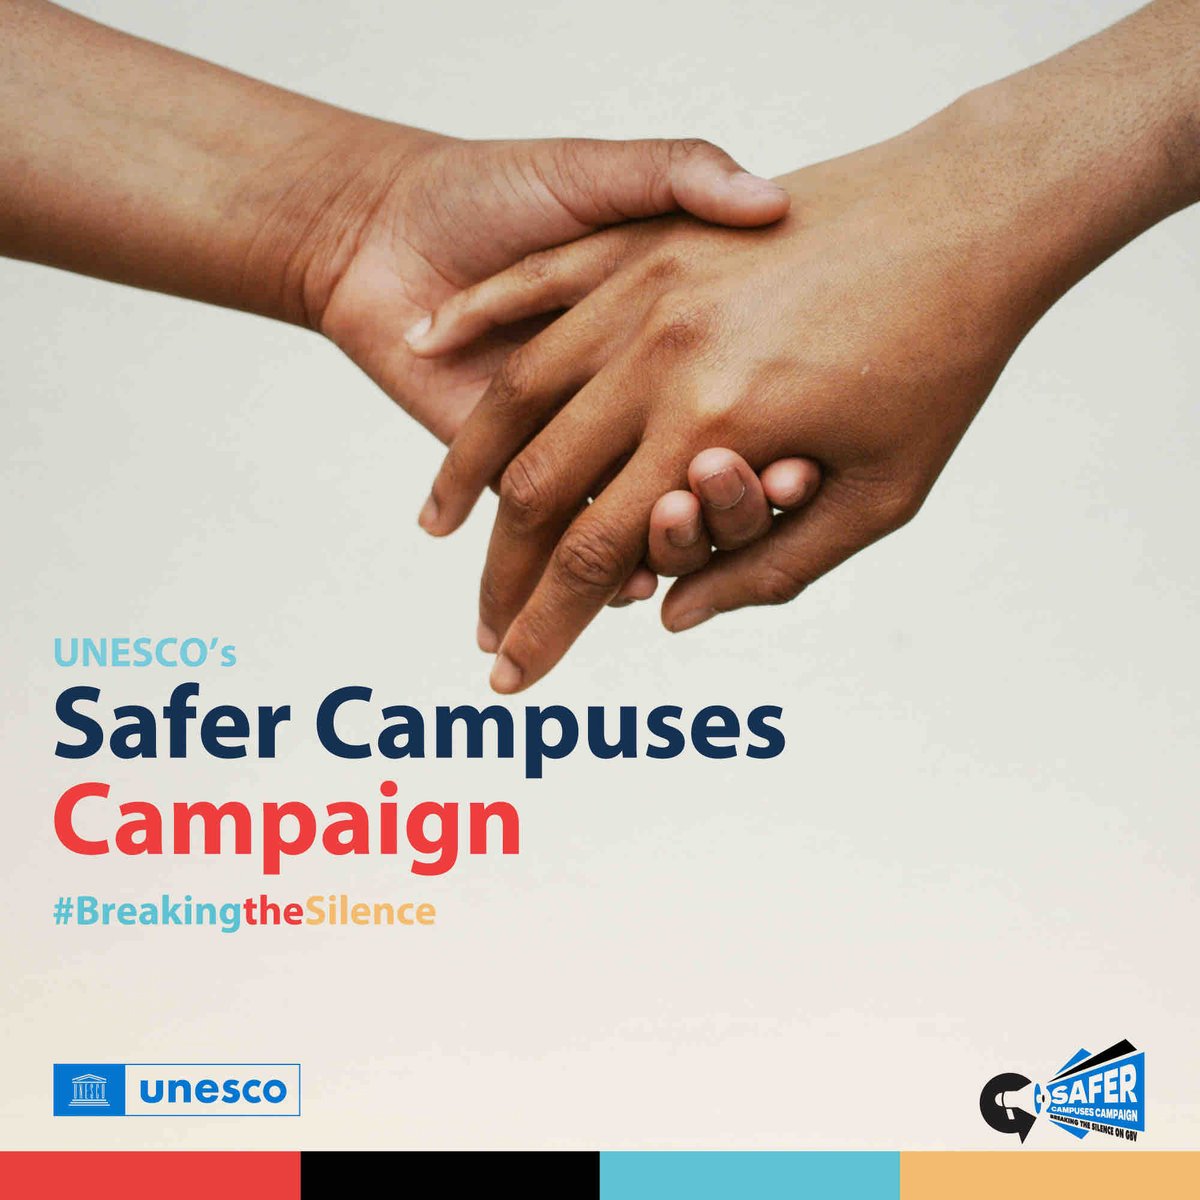 Gender-based violence on campus isn’t just a number - it’s a reality for many students. By acknowledging its effects, we open the door to empowering those affected to speak out. Let’s unite to build violence-free universities. #BreakingTheSilence #SaferCampusesCampaign #UNESCO